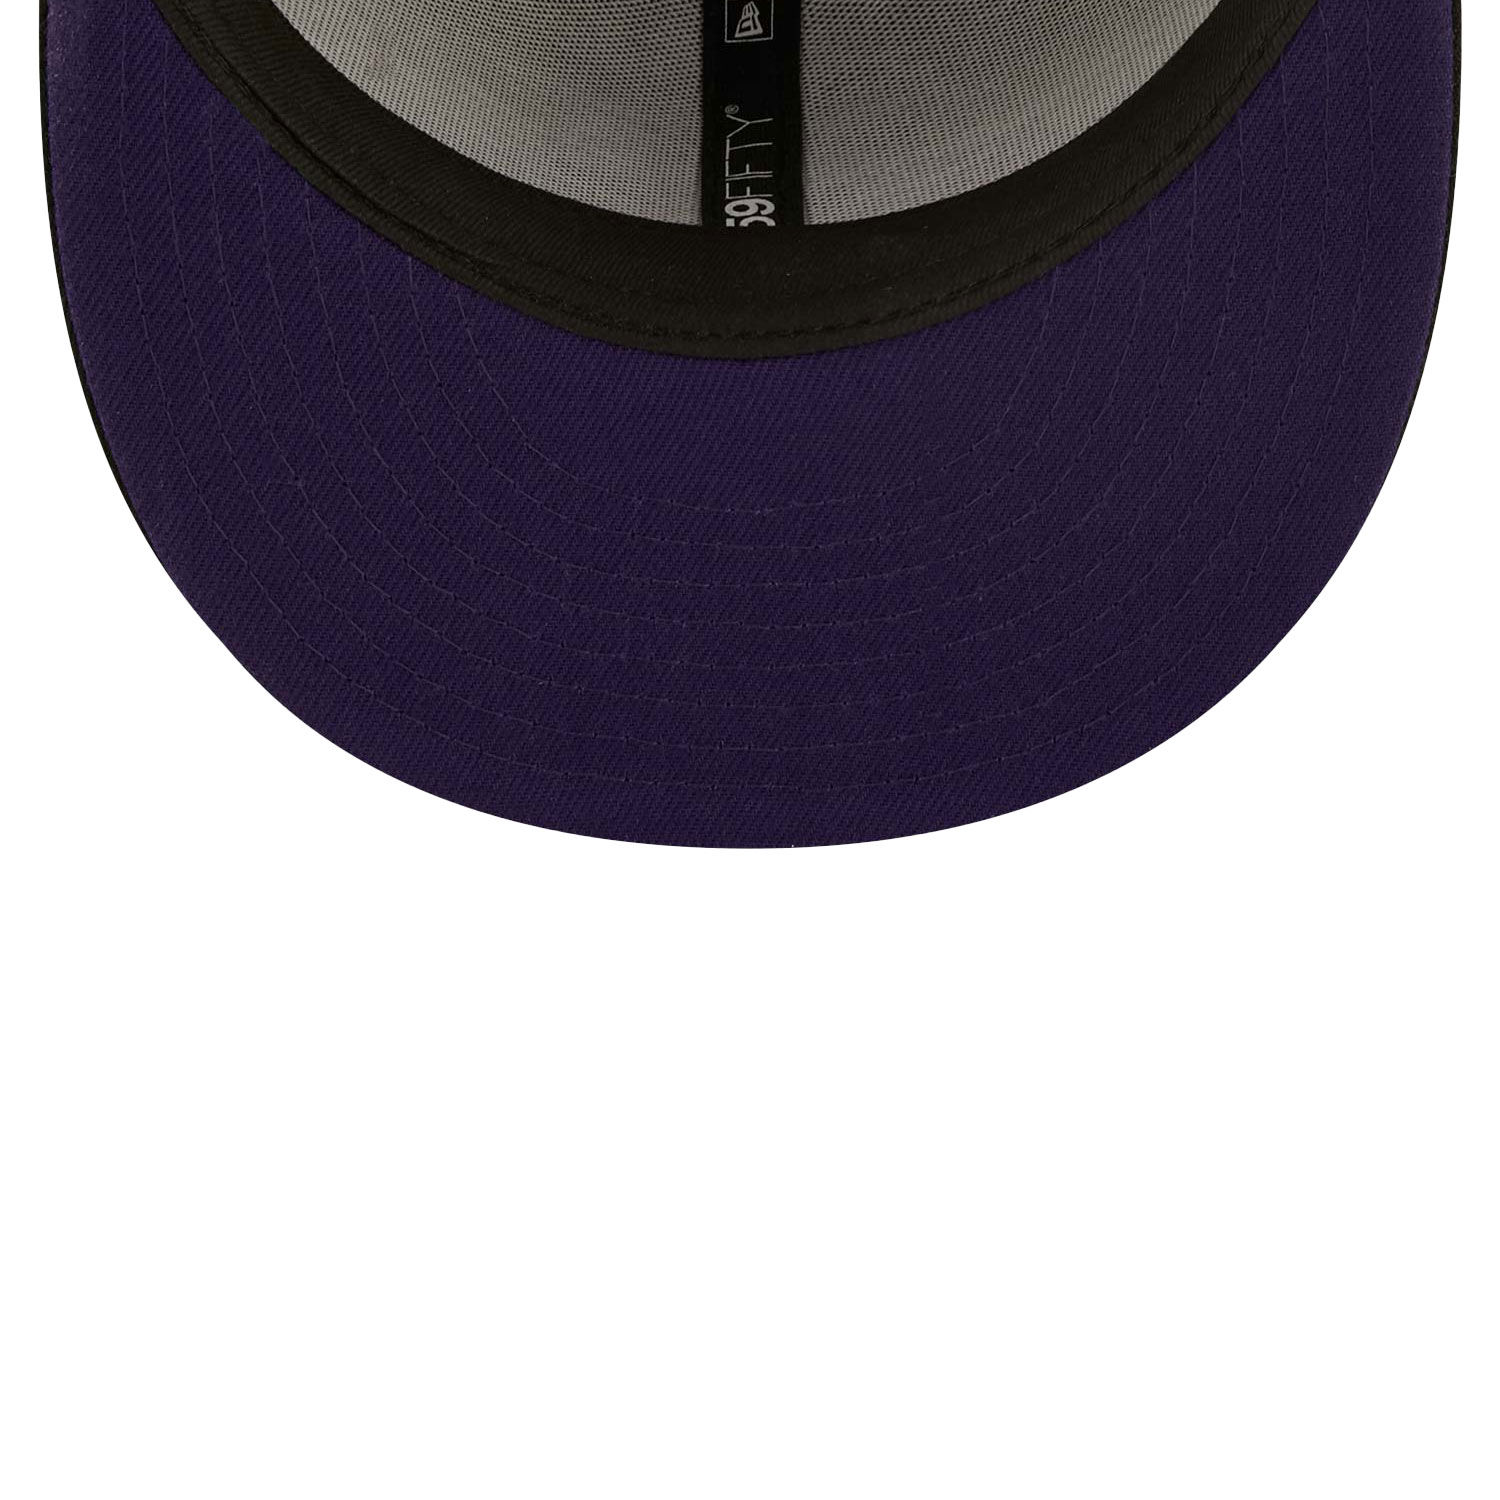 Oakland Athletics Purple Wheat 59FIFTY Fitted Cap